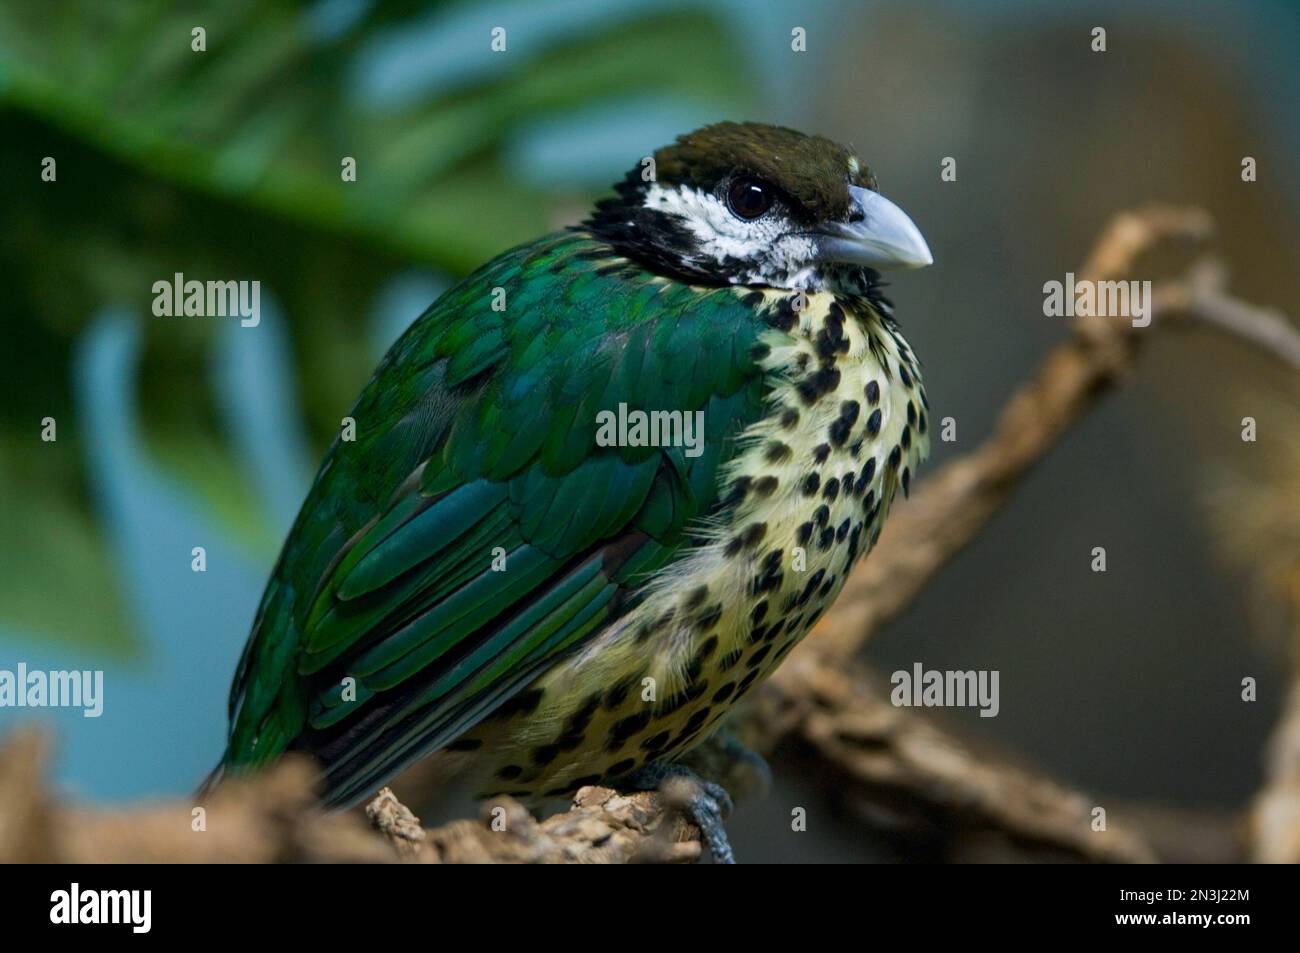 Close-up portrait of a Northern white-eared catbird (Ailuroedus buccoides geislerorum) in a zoo; Denver, Colorado, United States of America Stock Photo